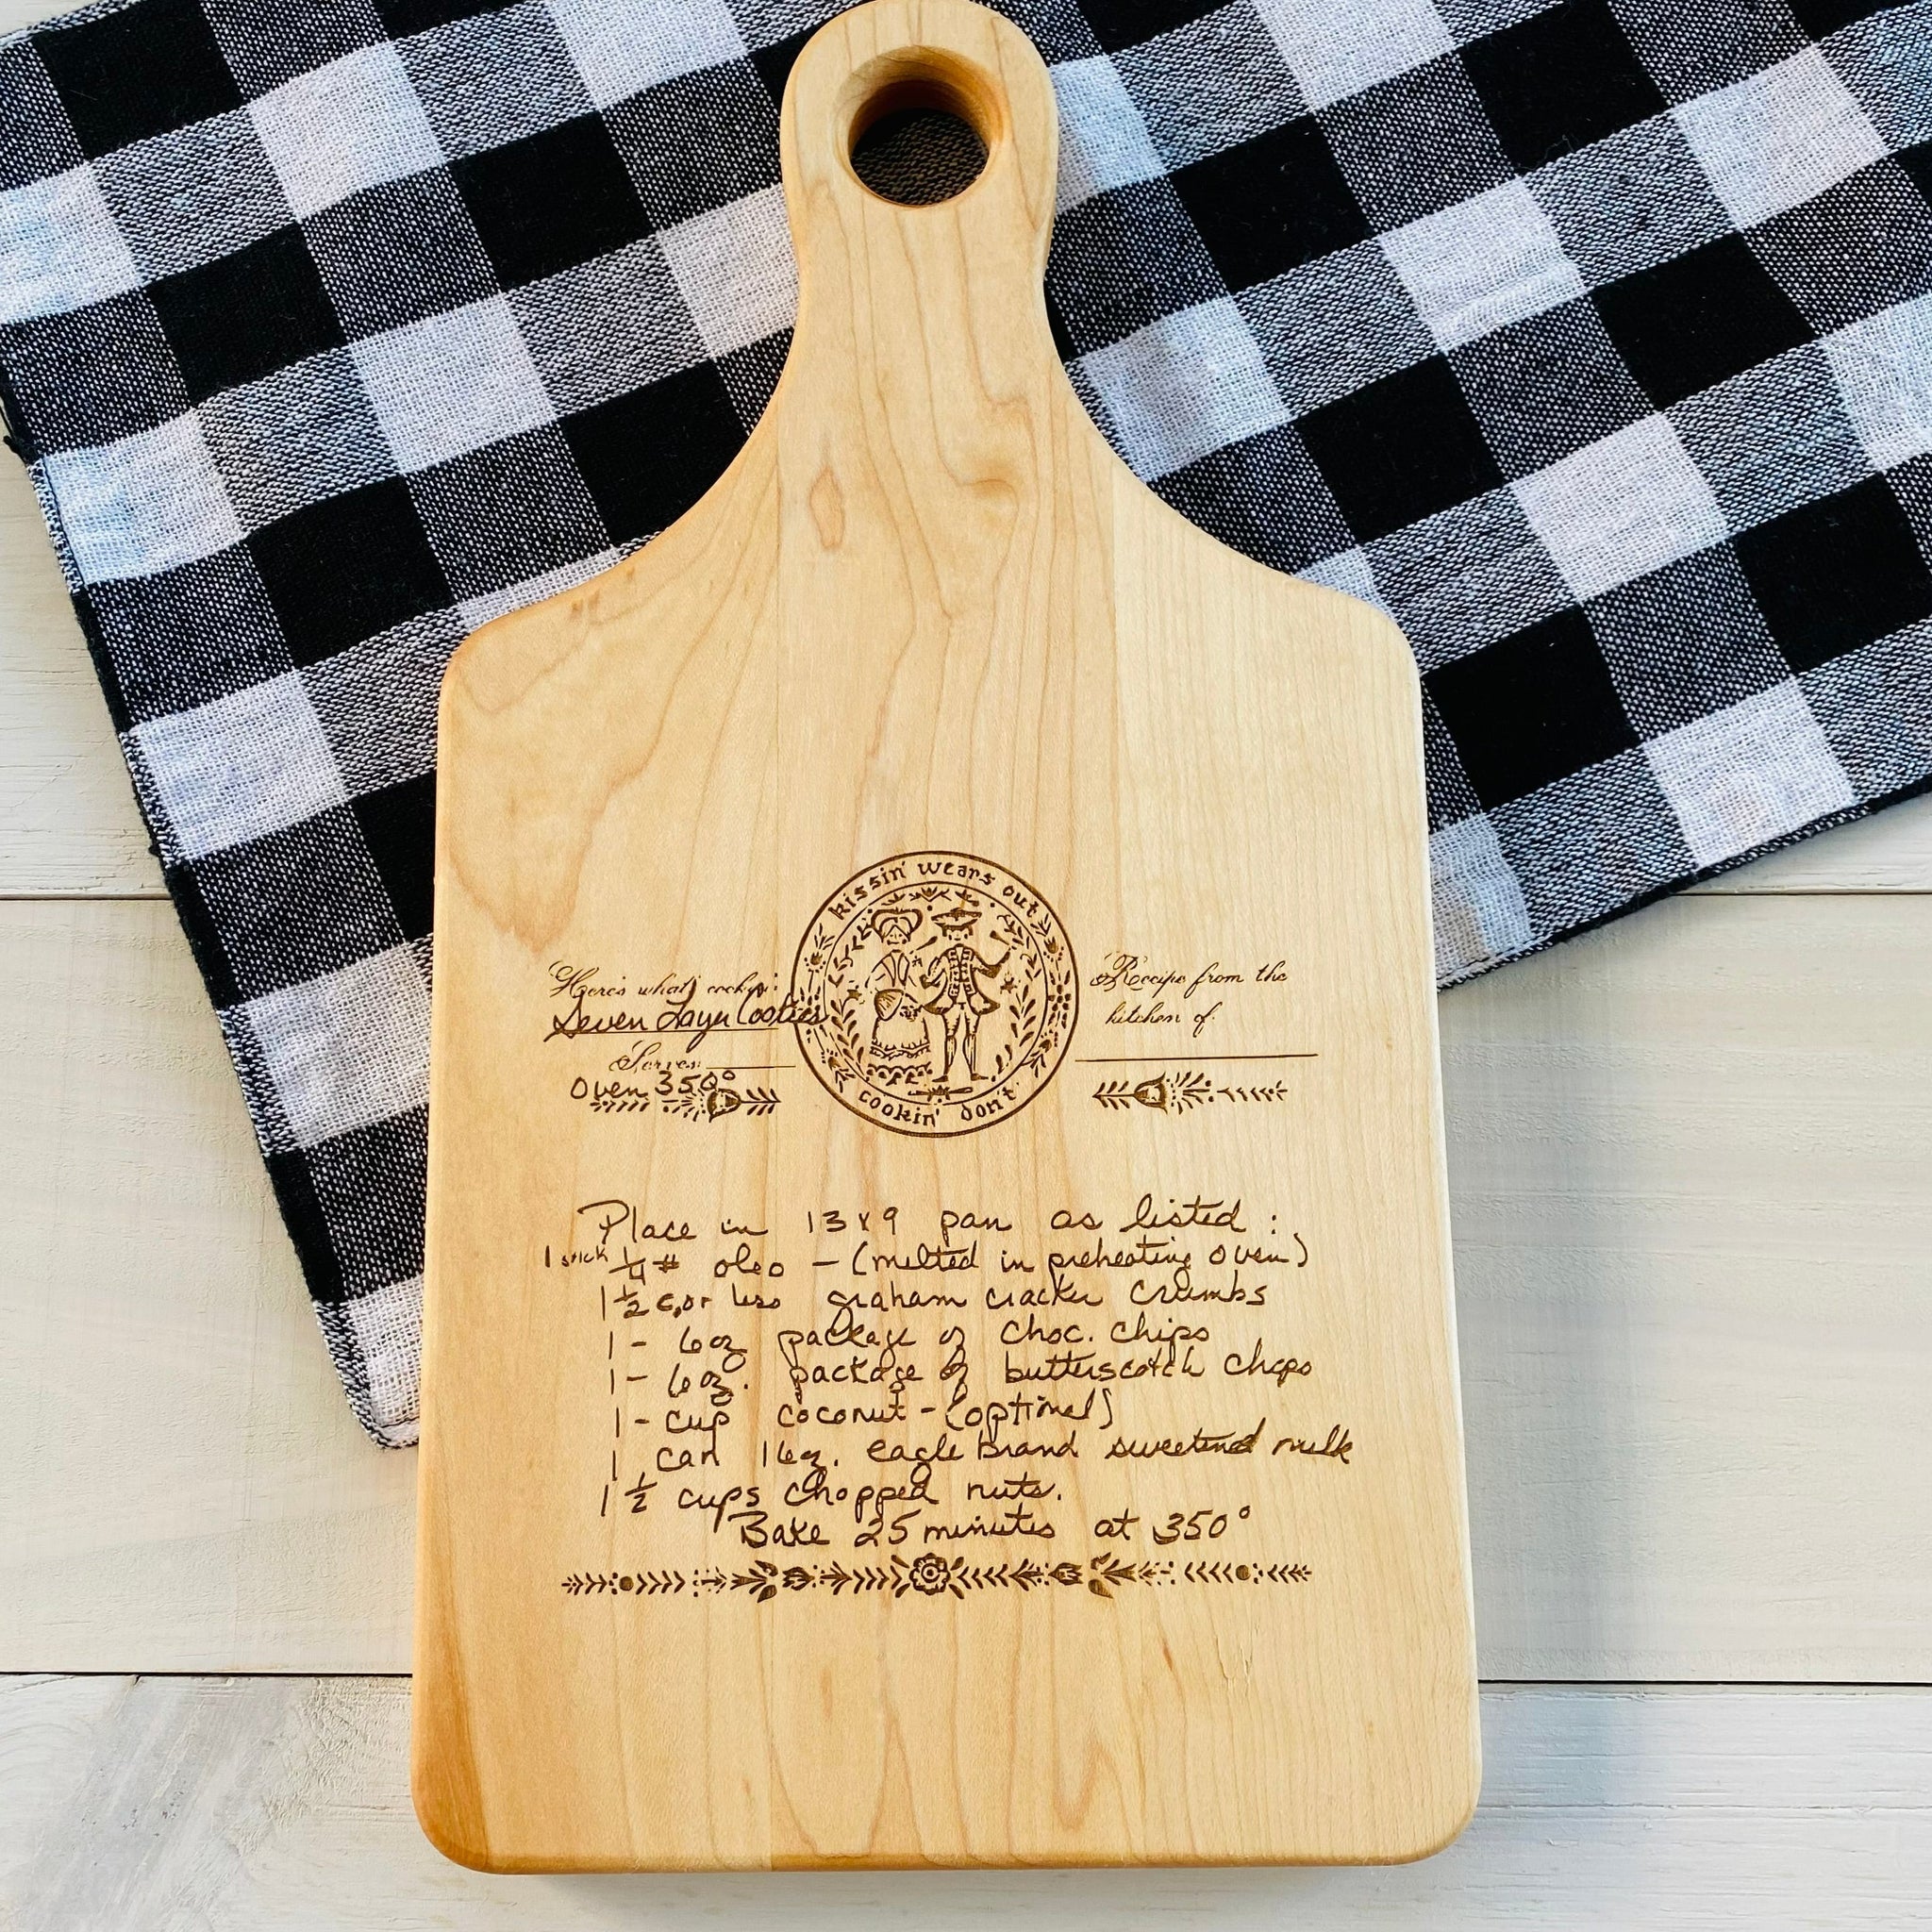 Upload Your Recipe Engraved Cutting Board